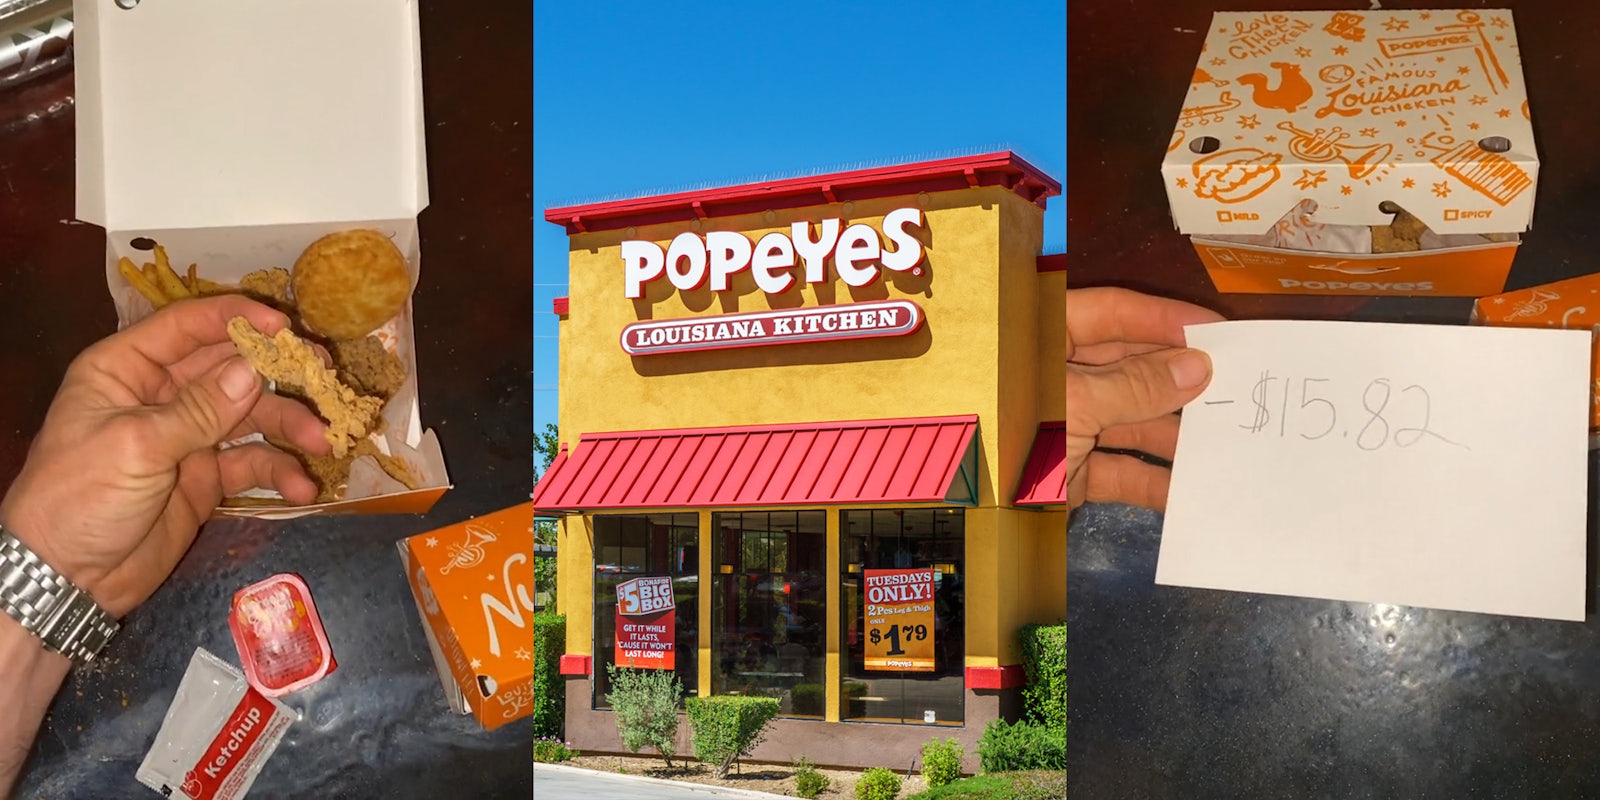 man holding Popeyes chicken over box (l) Popeyes sign on building (c) man holding index card with '-$15.82' written in pen (r)